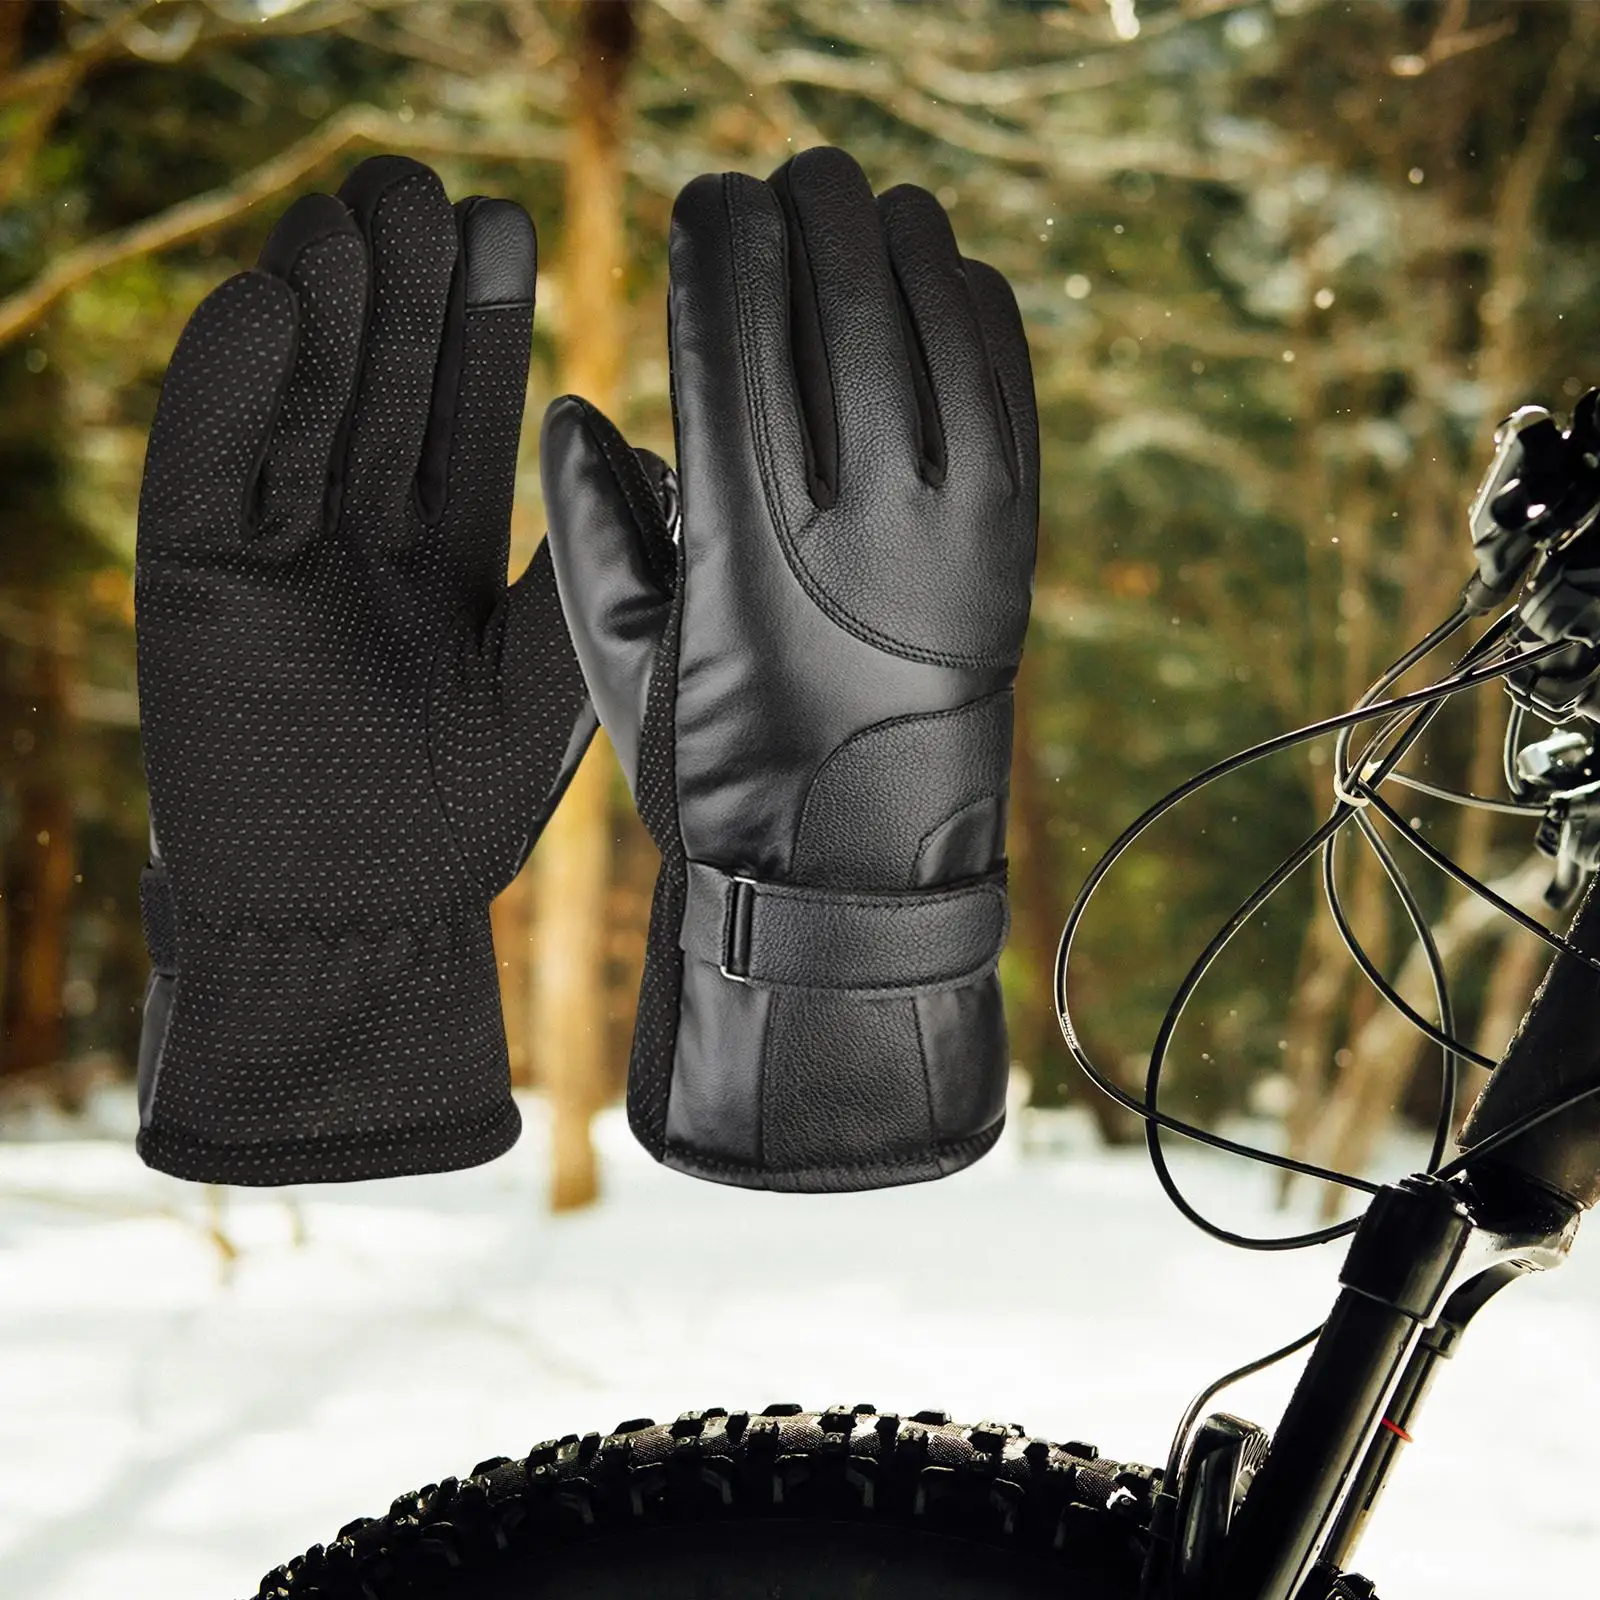 Winter Touchscreen Gloves Windproof Waterproof Cold Weather Outdoor Warm Nonslip Mittens for Camping Hiking Ski Sports Snow